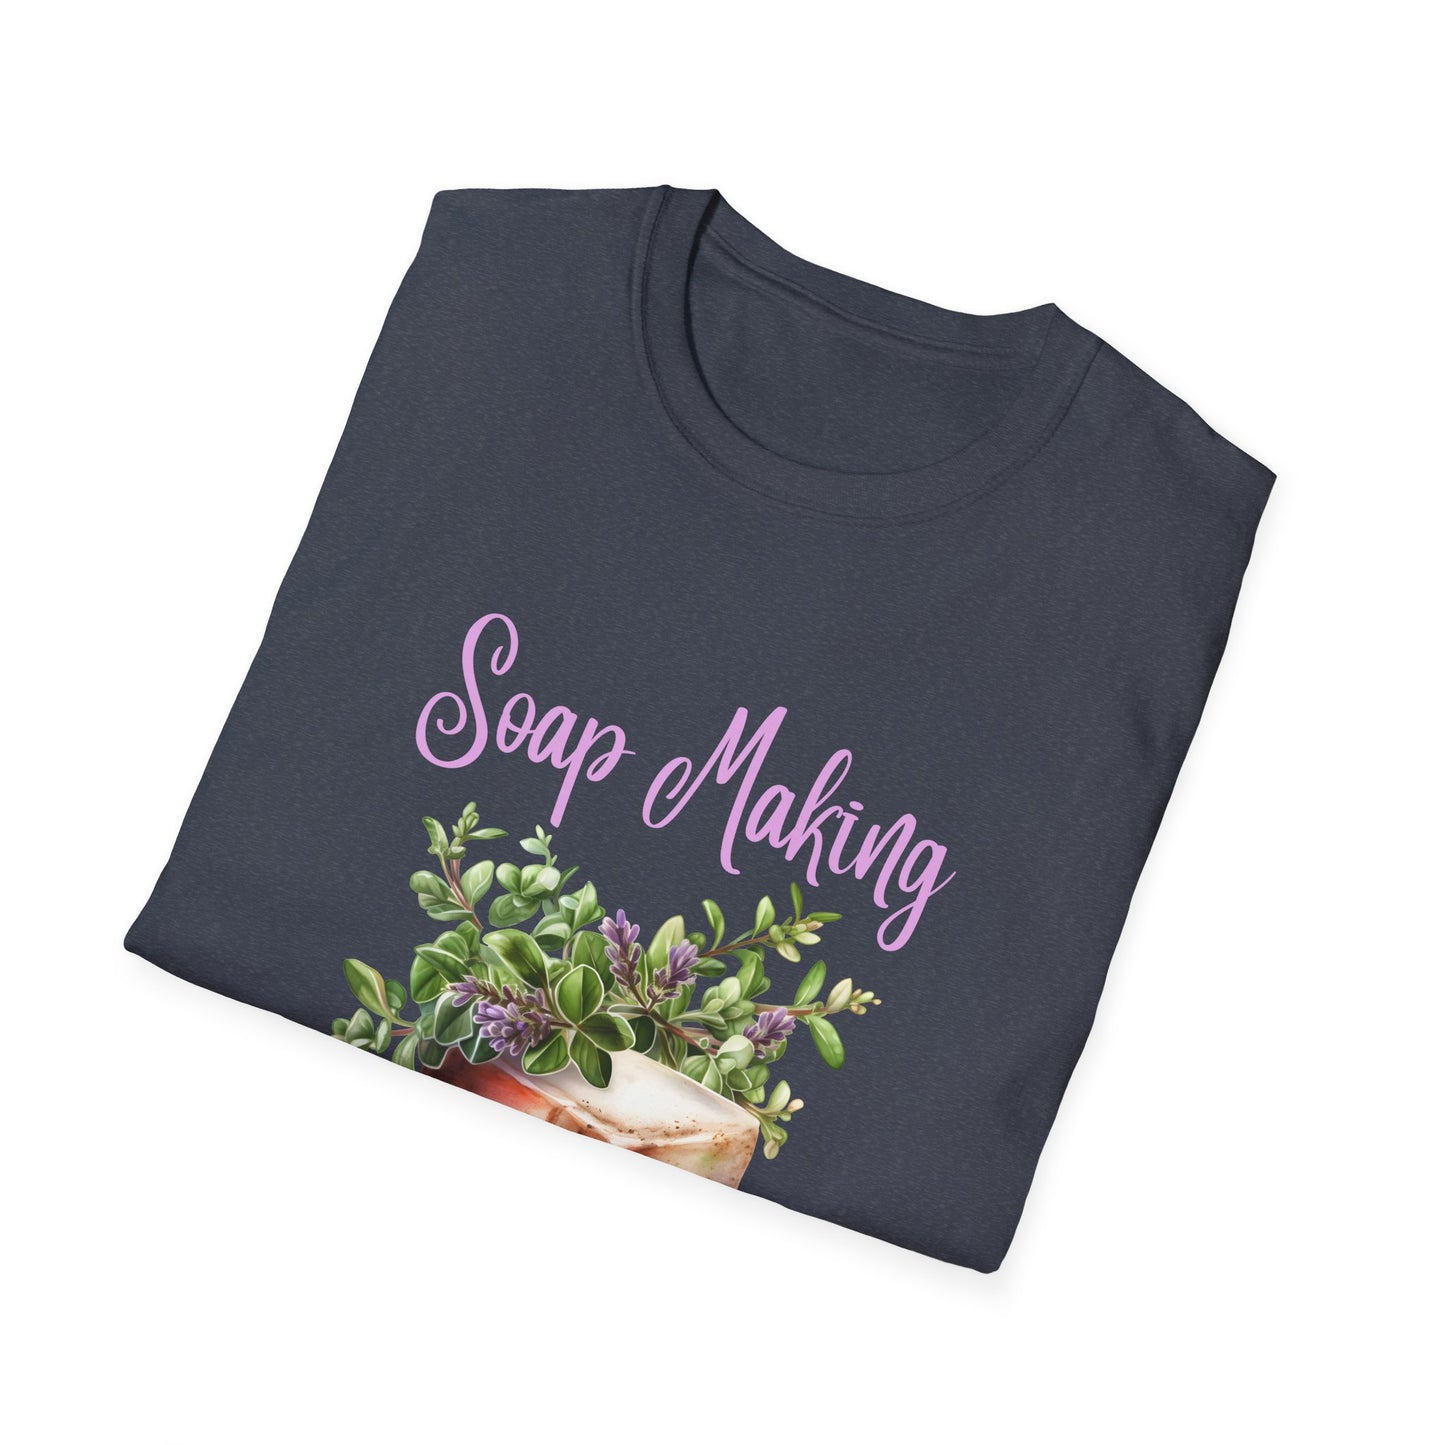 Soap Making is my Passion T-Shirt